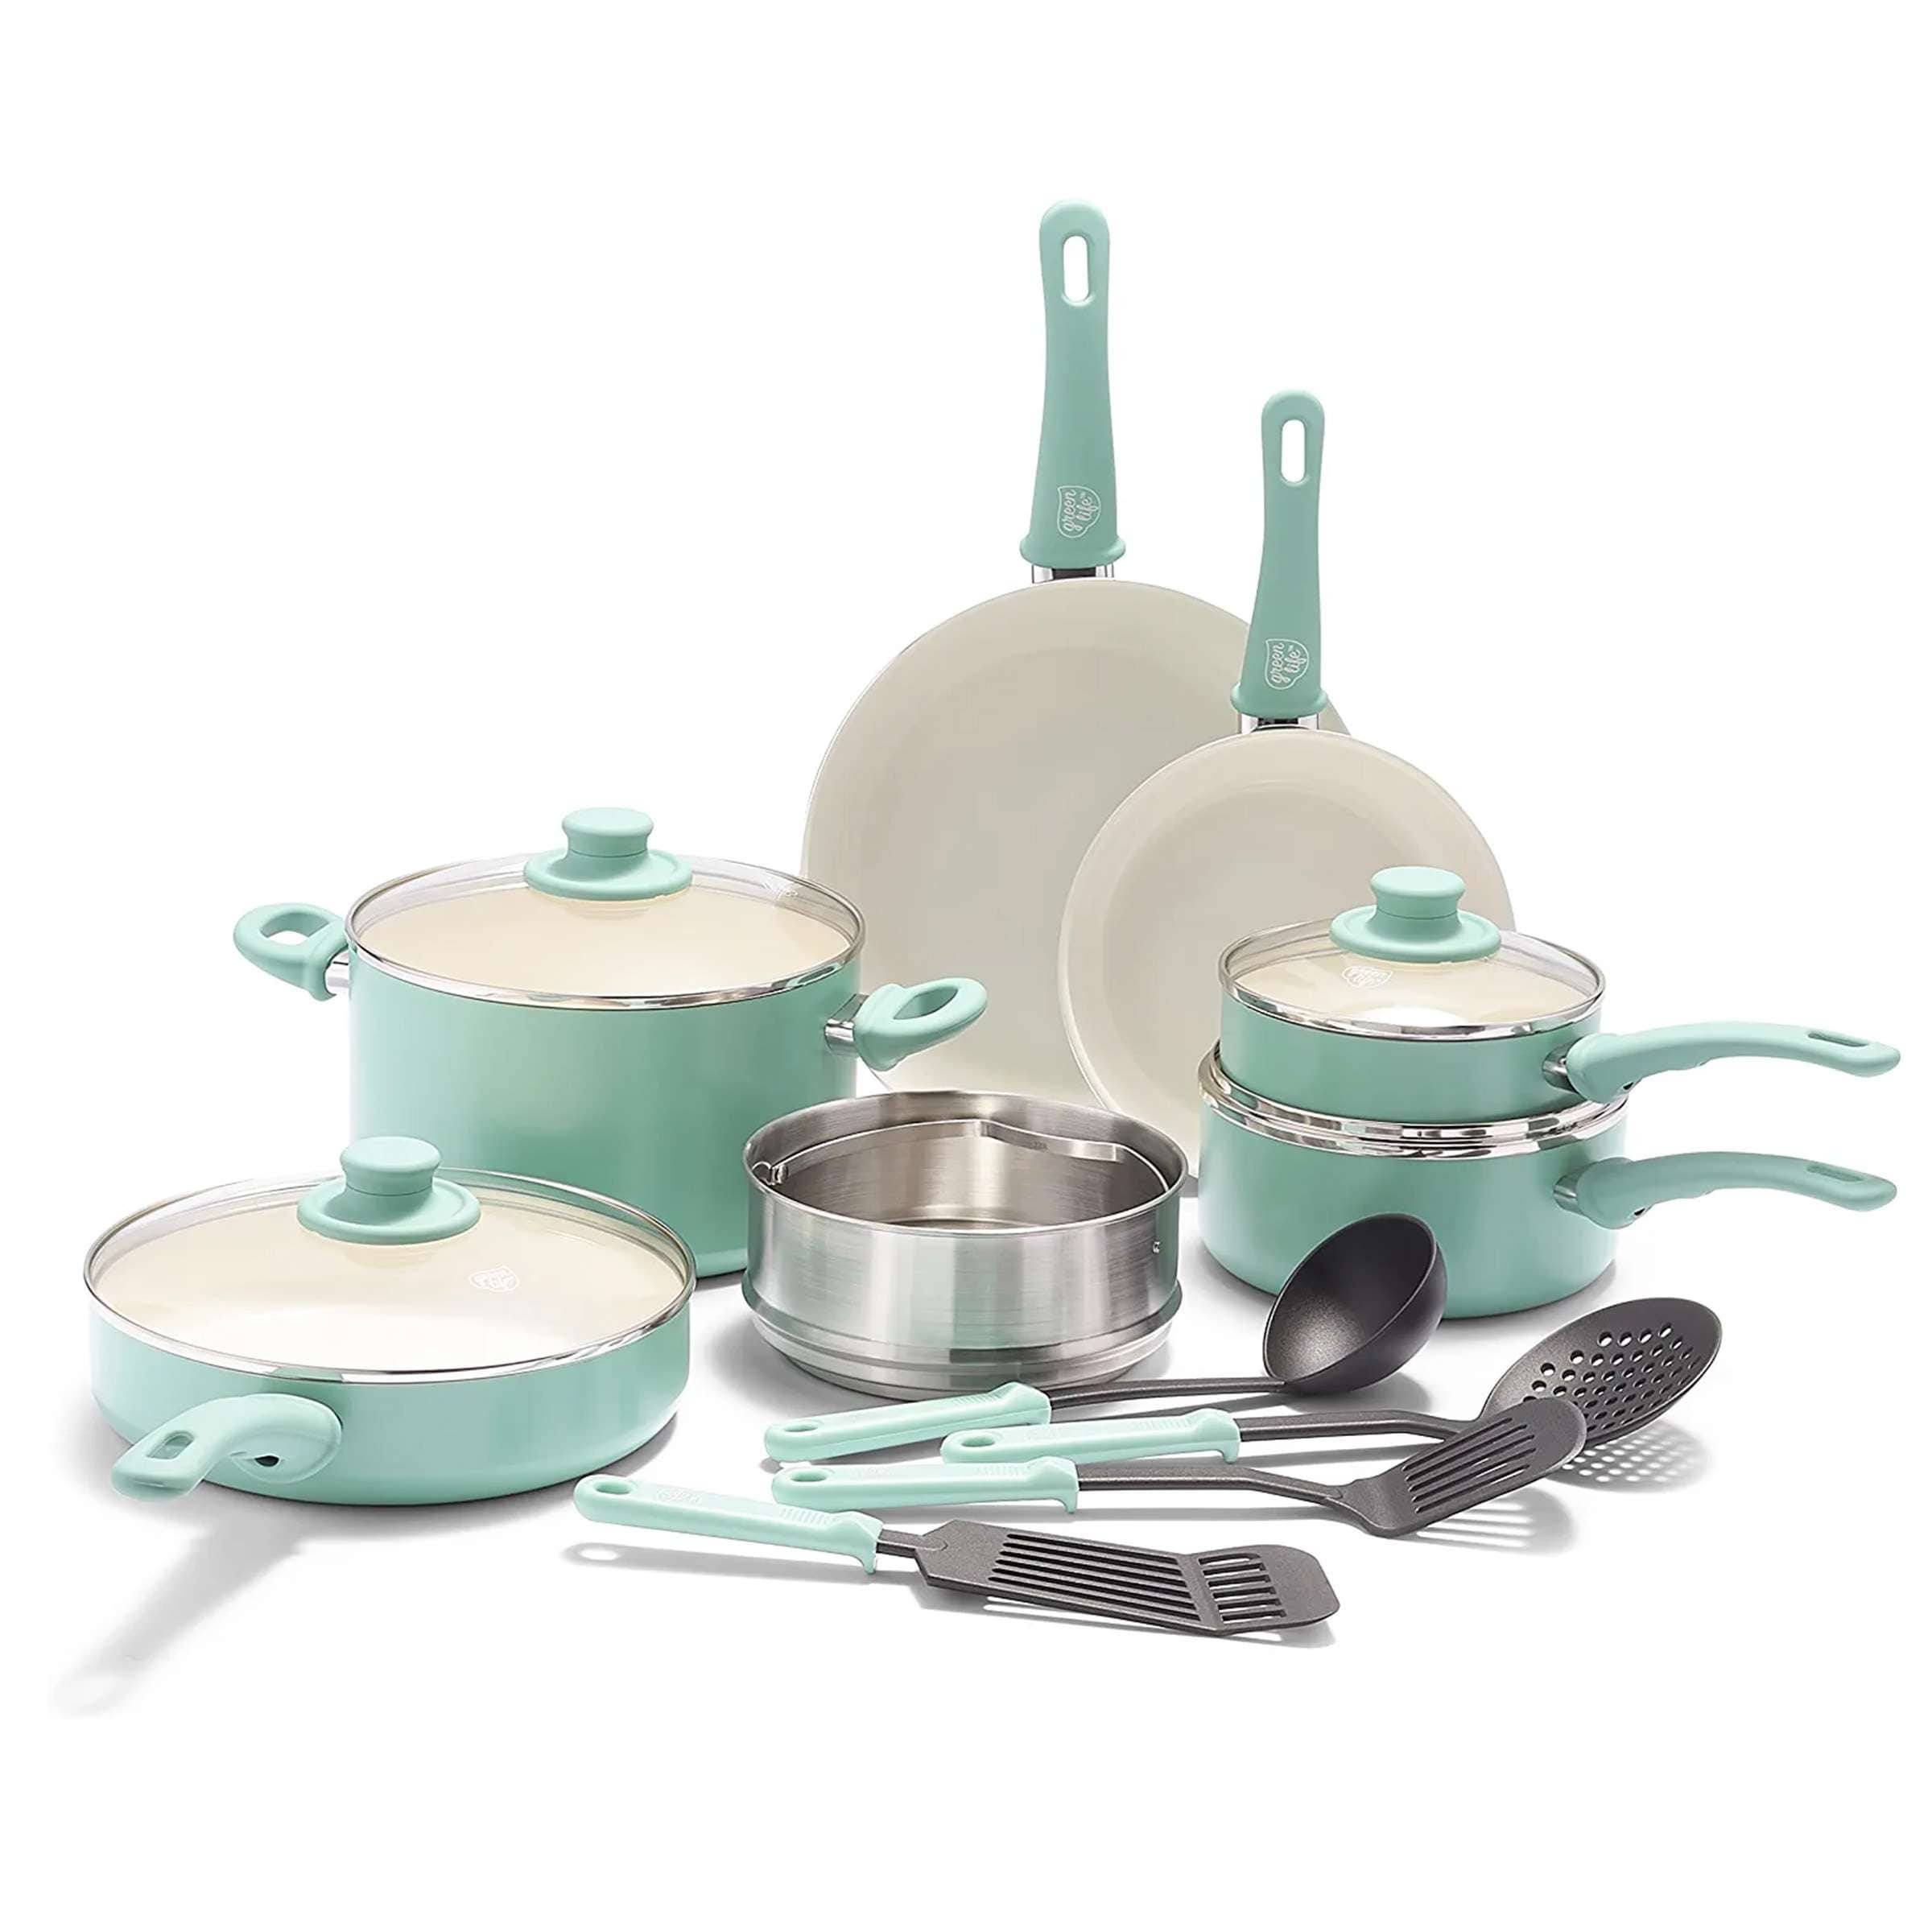 GreenLife Artisan Healthy Ceramic Nonstick 12pc Cookware Set - Bed